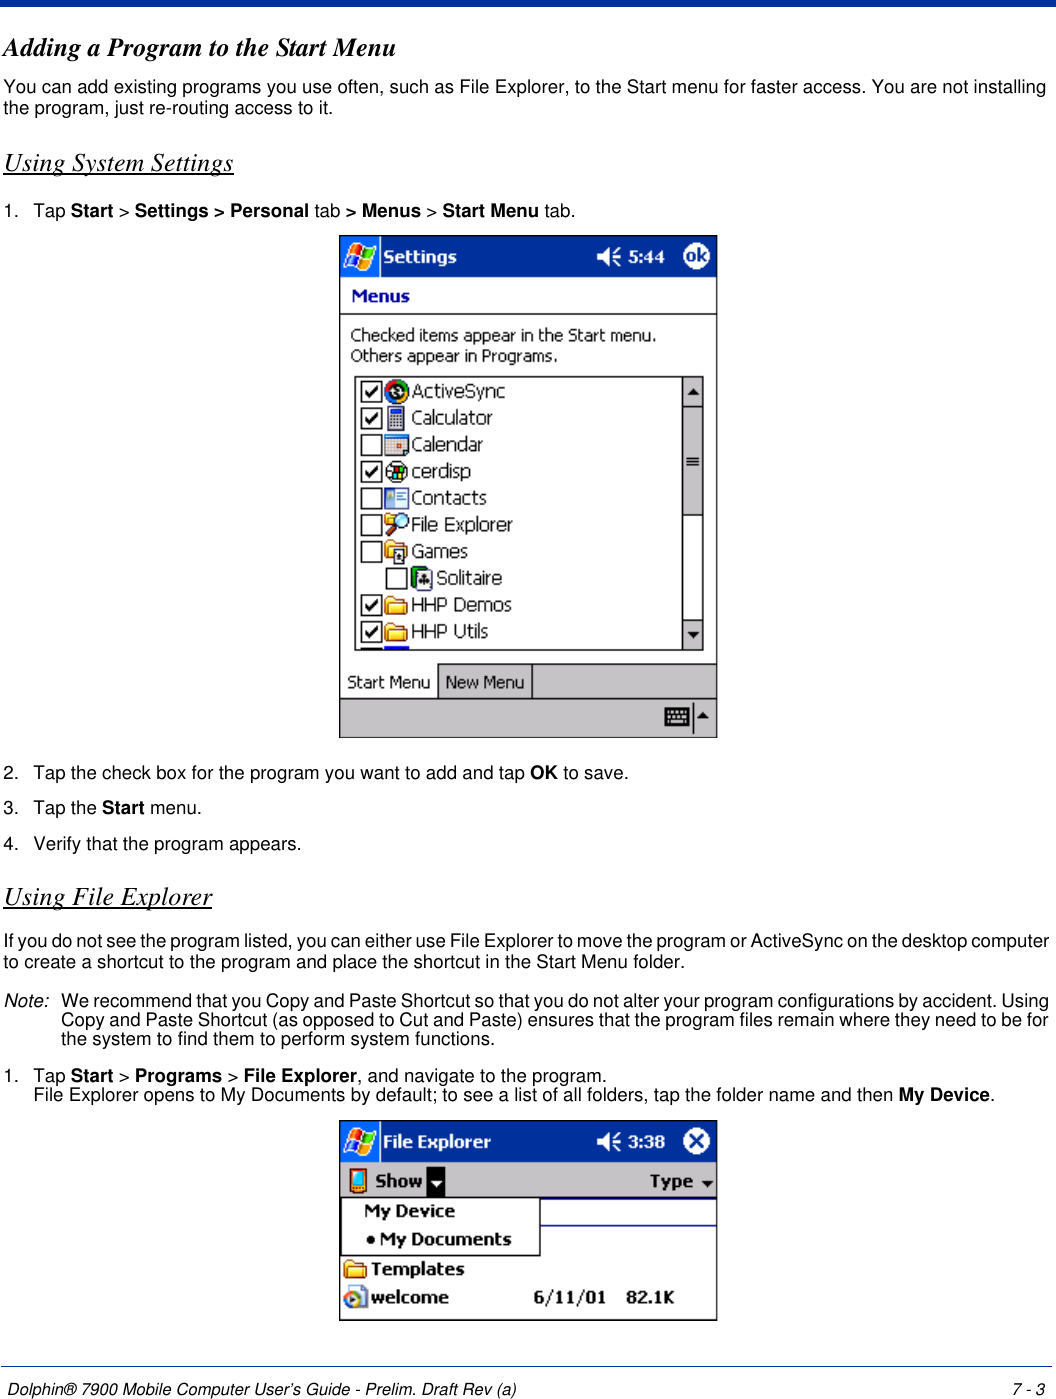 Dolphin® 7900 Mobile Computer User’s Guide - Prelim. Draft Rev (a) 7 - 3Adding a Program to the Start MenuYou can add existing programs you use often, such as File Explorer, to the Start menu for faster access. You are not installing the program, just re-routing access to it.Using System Settings1. Tap Start &gt; Settings &gt; Personal tab &gt; Menus &gt; Start Menu tab. 2. Tap the check box for the program you want to add and tap OK to save.3. Tap the Start menu.4. Verify that the program appears.Using File ExplorerIf you do not see the program listed, you can either use File Explorer to move the program or ActiveSync on the desktop computer to create a shortcut to the program and place the shortcut in the Start Menu folder.Note: We recommend that you Copy and Paste Shortcut so that you do not alter your program configurations by accident. Using Copy and Paste Shortcut (as opposed to Cut and Paste) ensures that the program files remain where they need to be for the system to find them to perform system functions.1. Tap Start &gt; Programs &gt; File Explorer, and navigate to the program. File Explorer opens to My Documents by default; to see a list of all folders, tap the folder name and then My Device. 